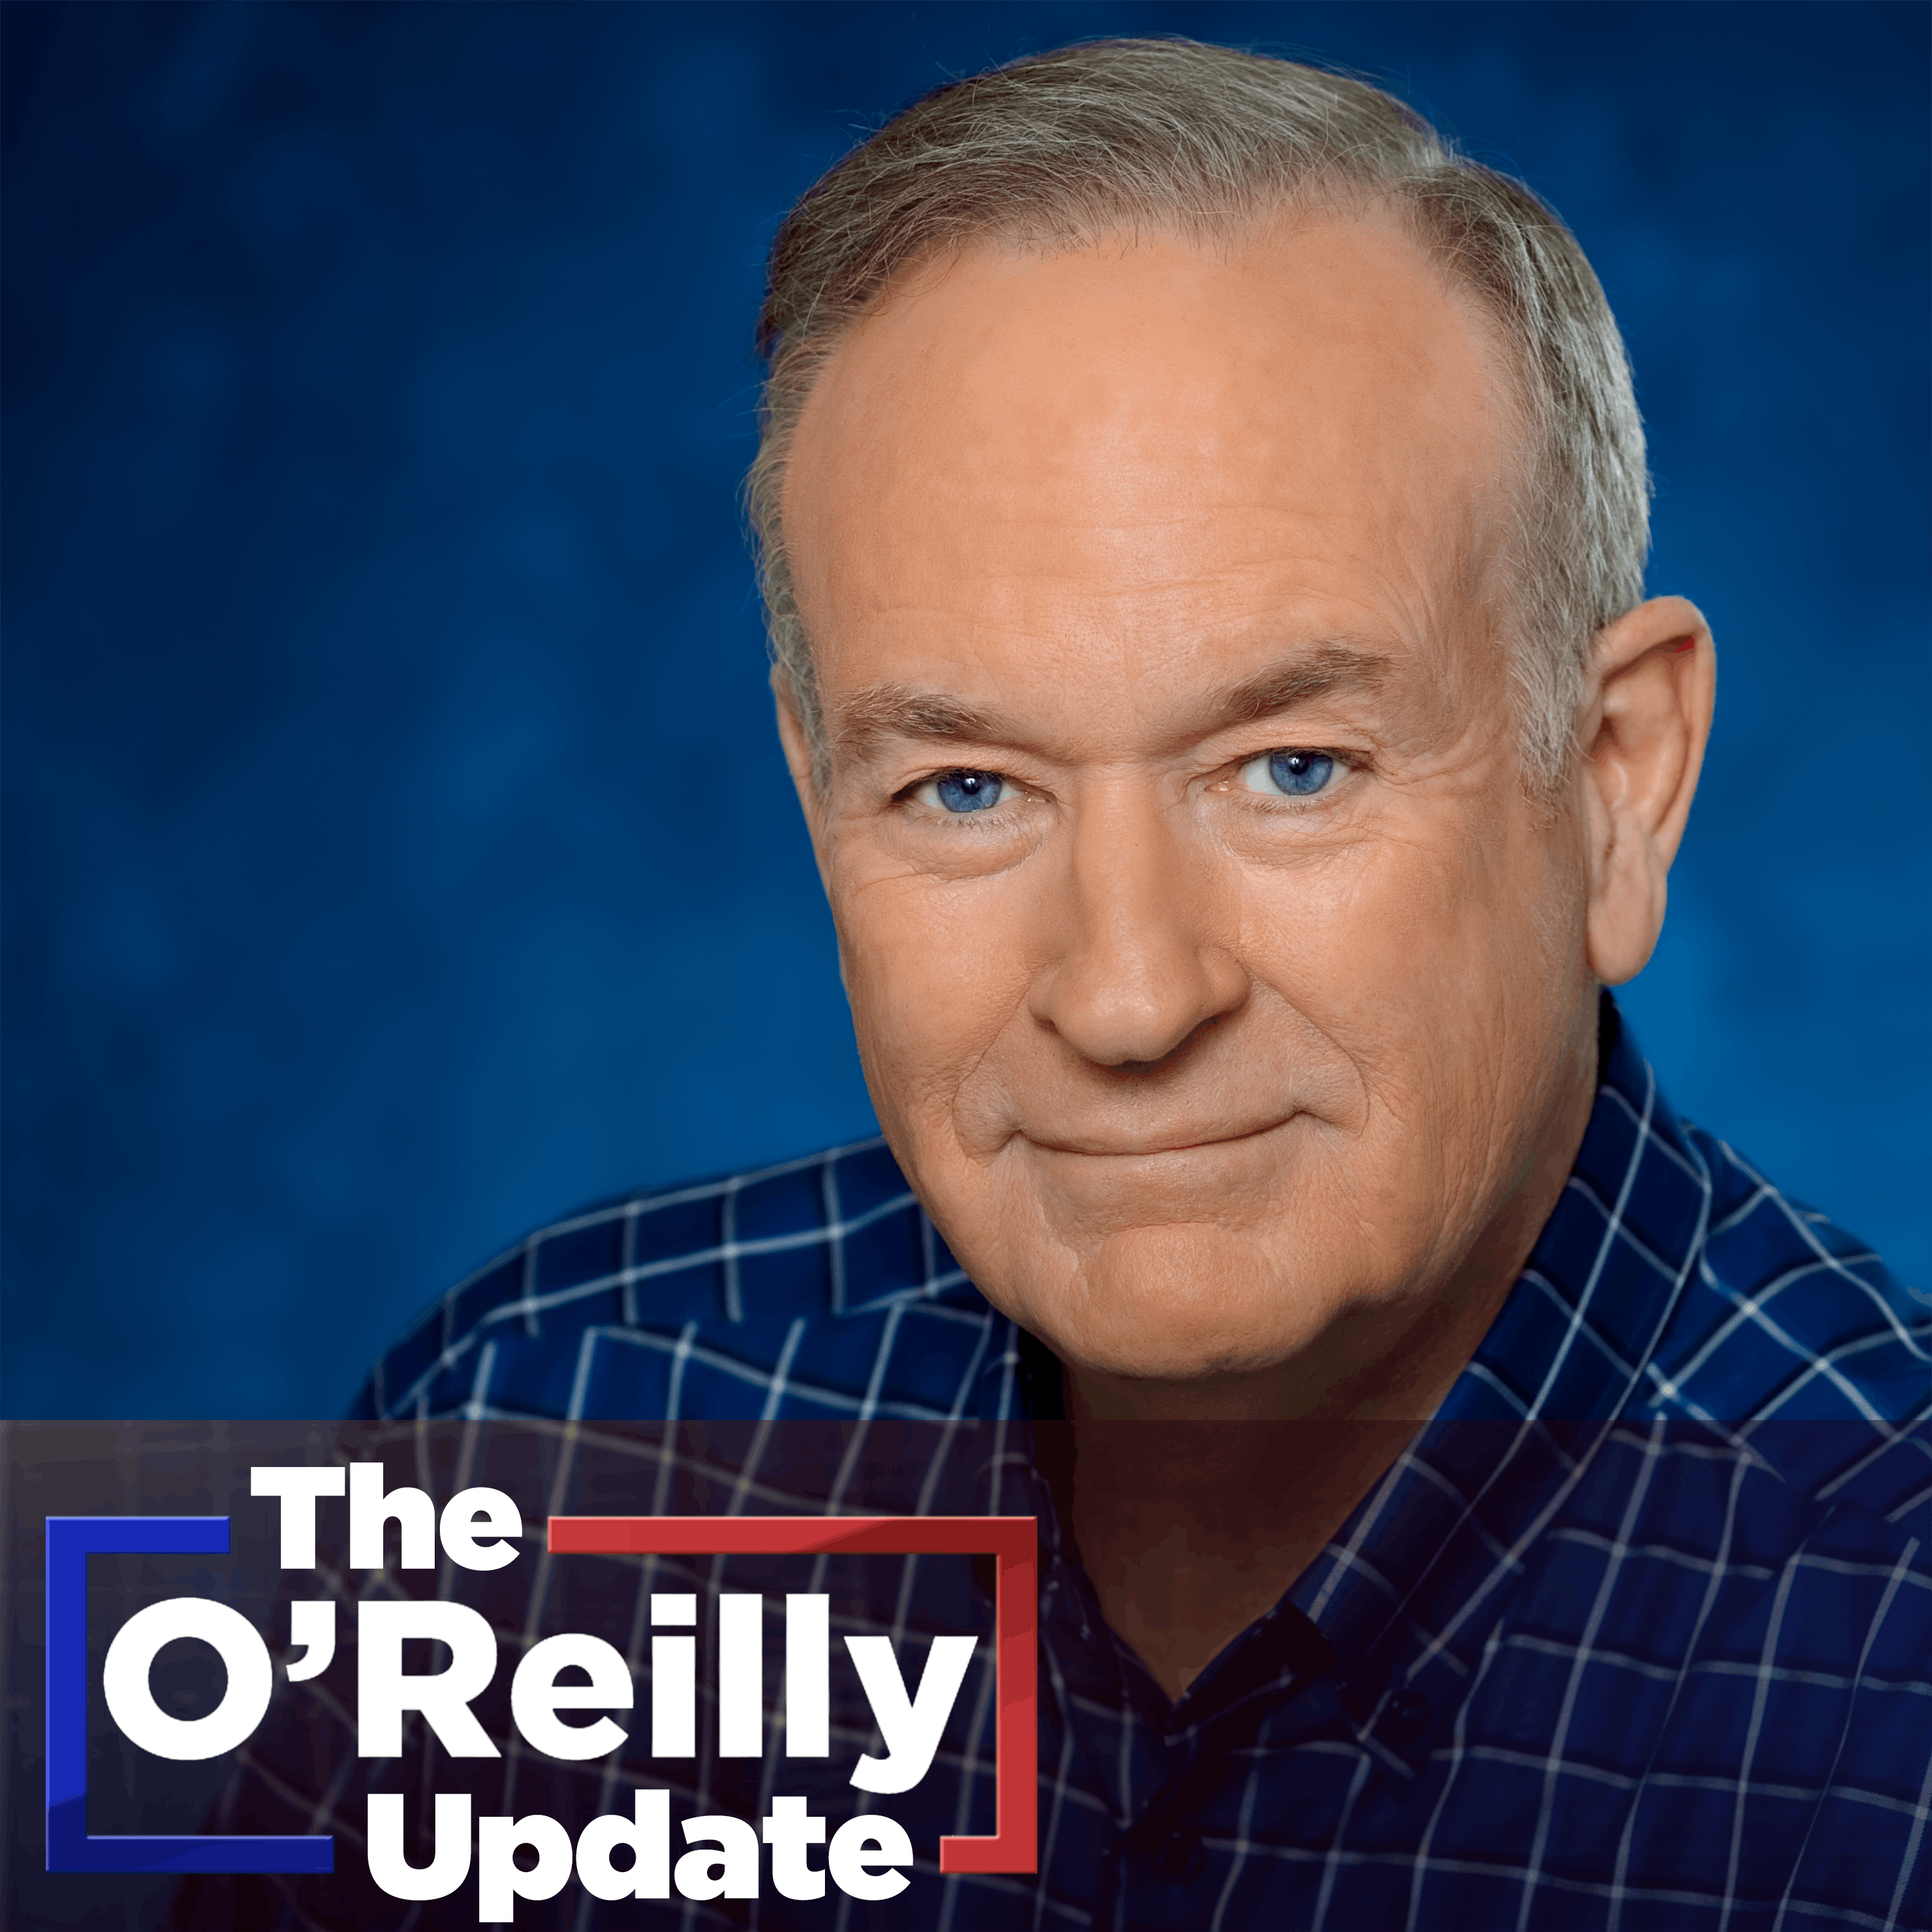 The O'Reilly Update, July 28, 2021